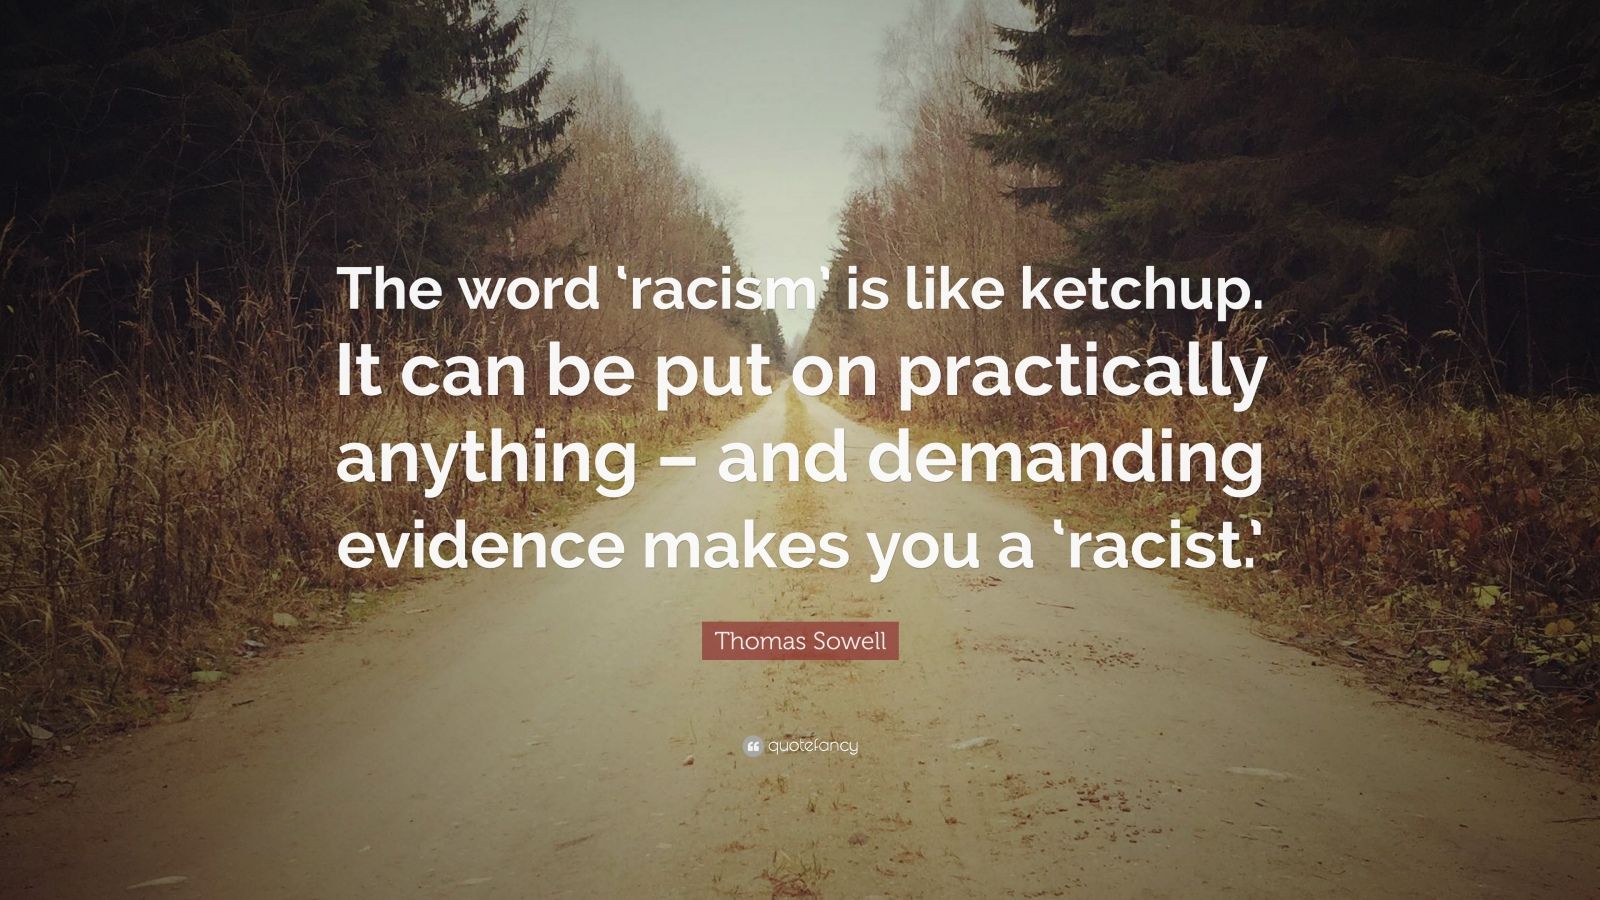 Thomas Sowell Quote: "The word 'racism' is like ketchup ...